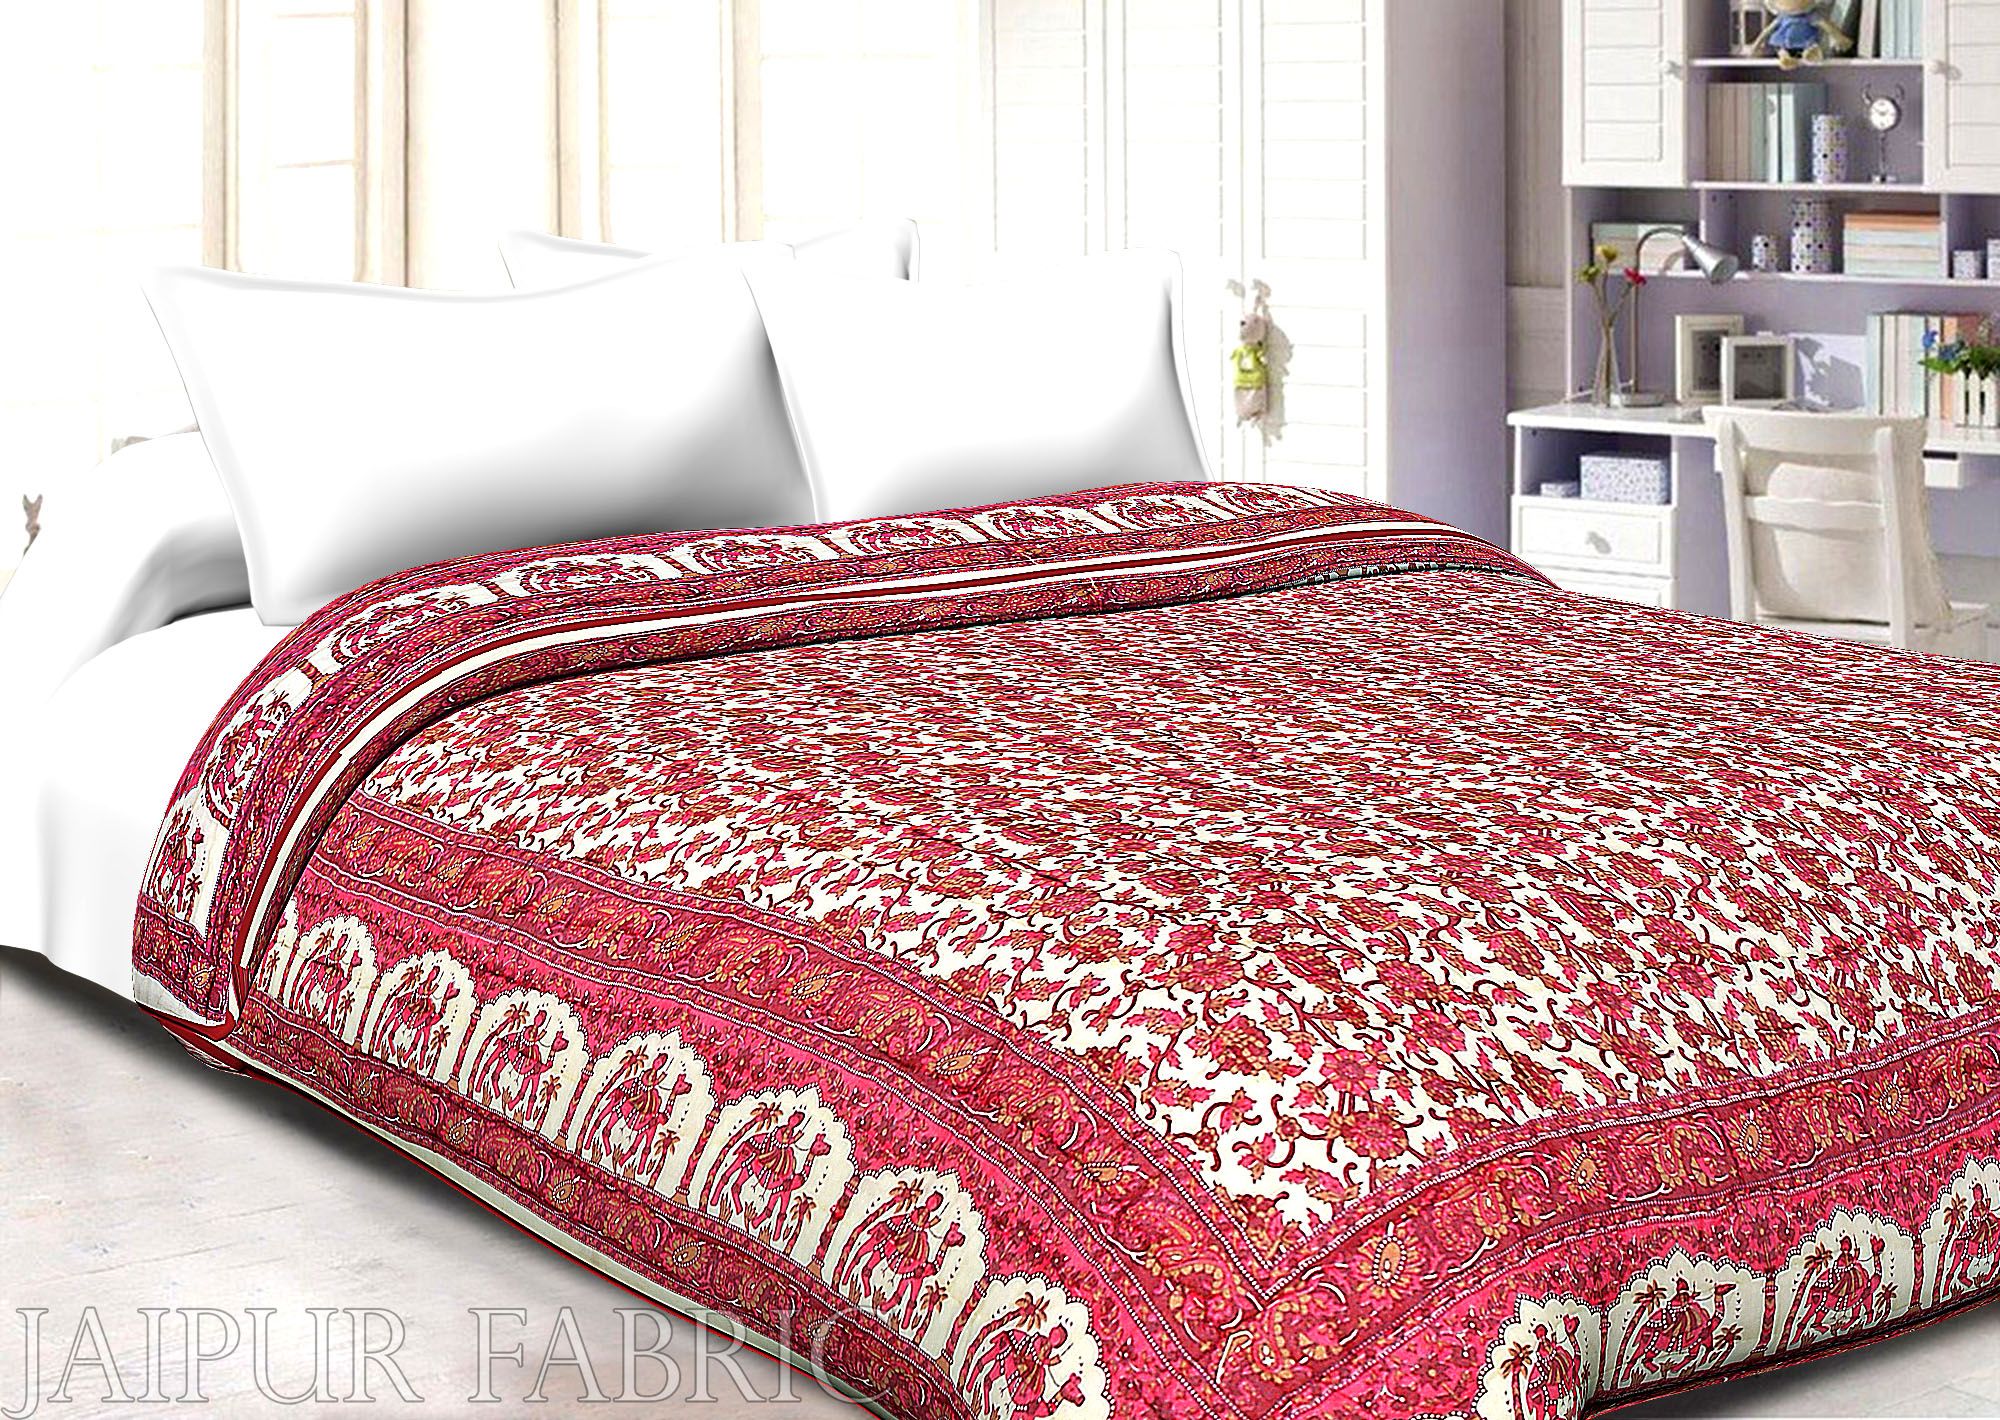 Cream Base Pink Print With Camel And Flower Cotton Double Bed Quilt